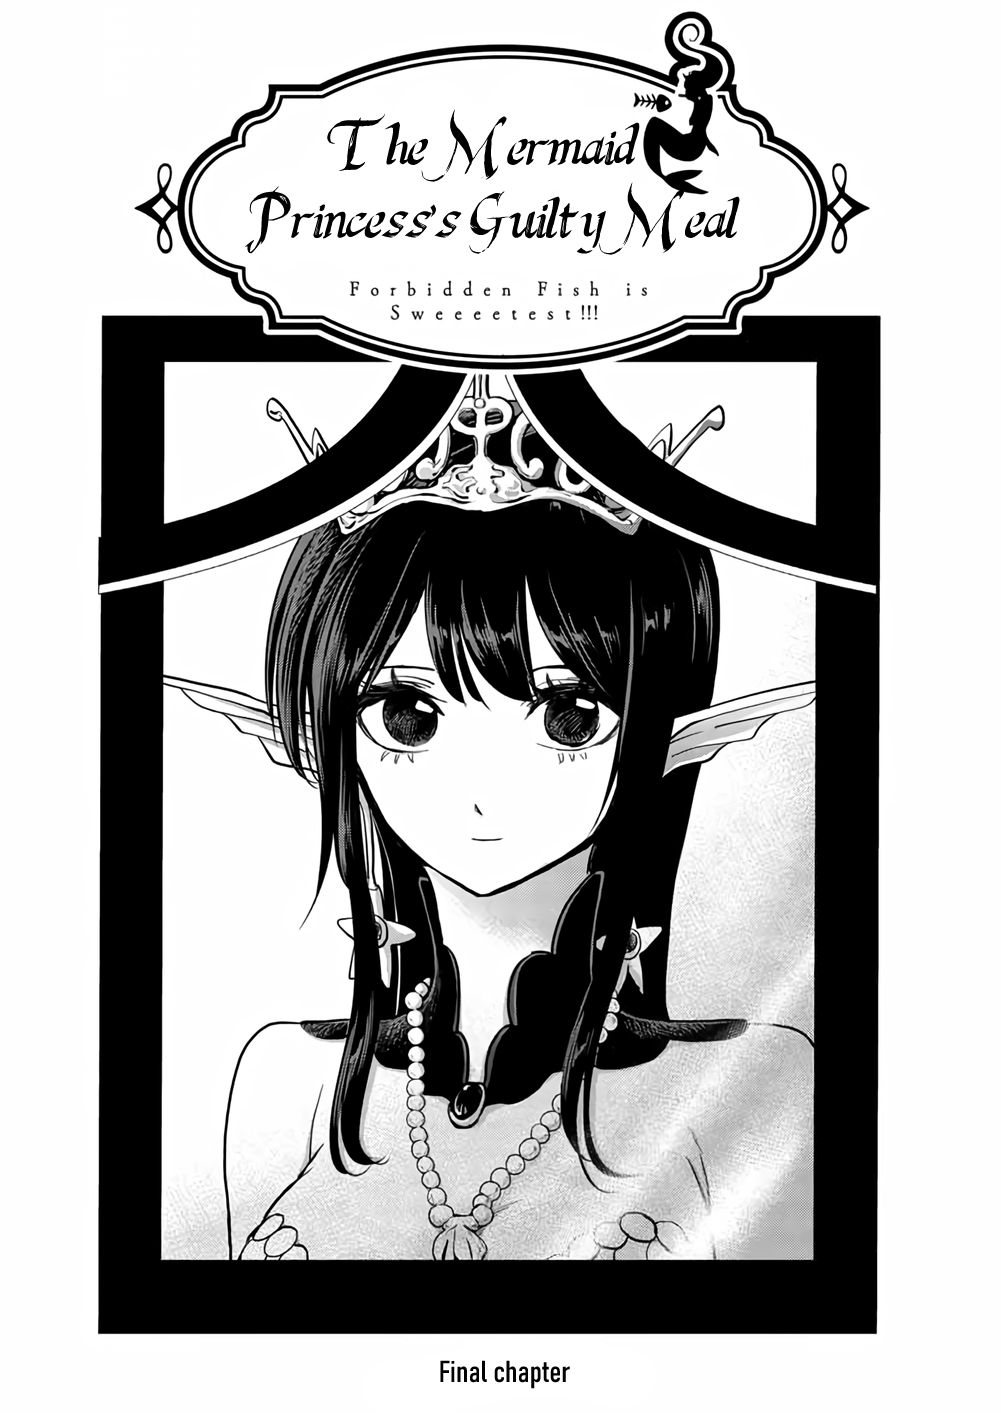 The Mermaid Princess's Guilty Meal 41 Final Chapter